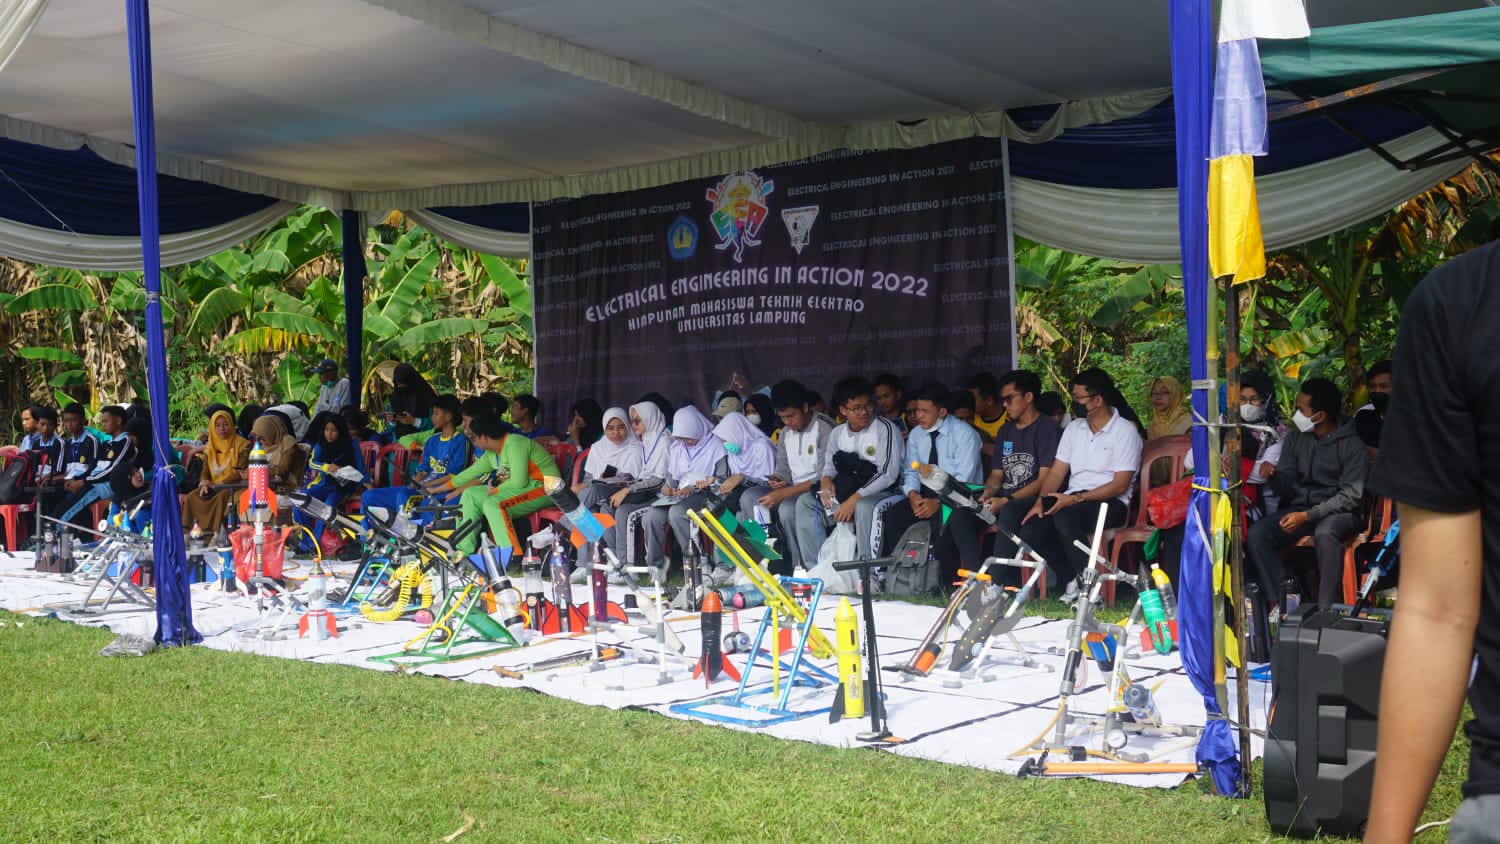 WD3 FT Unila Resmi Menutup Electrical Engineering in Action 2022